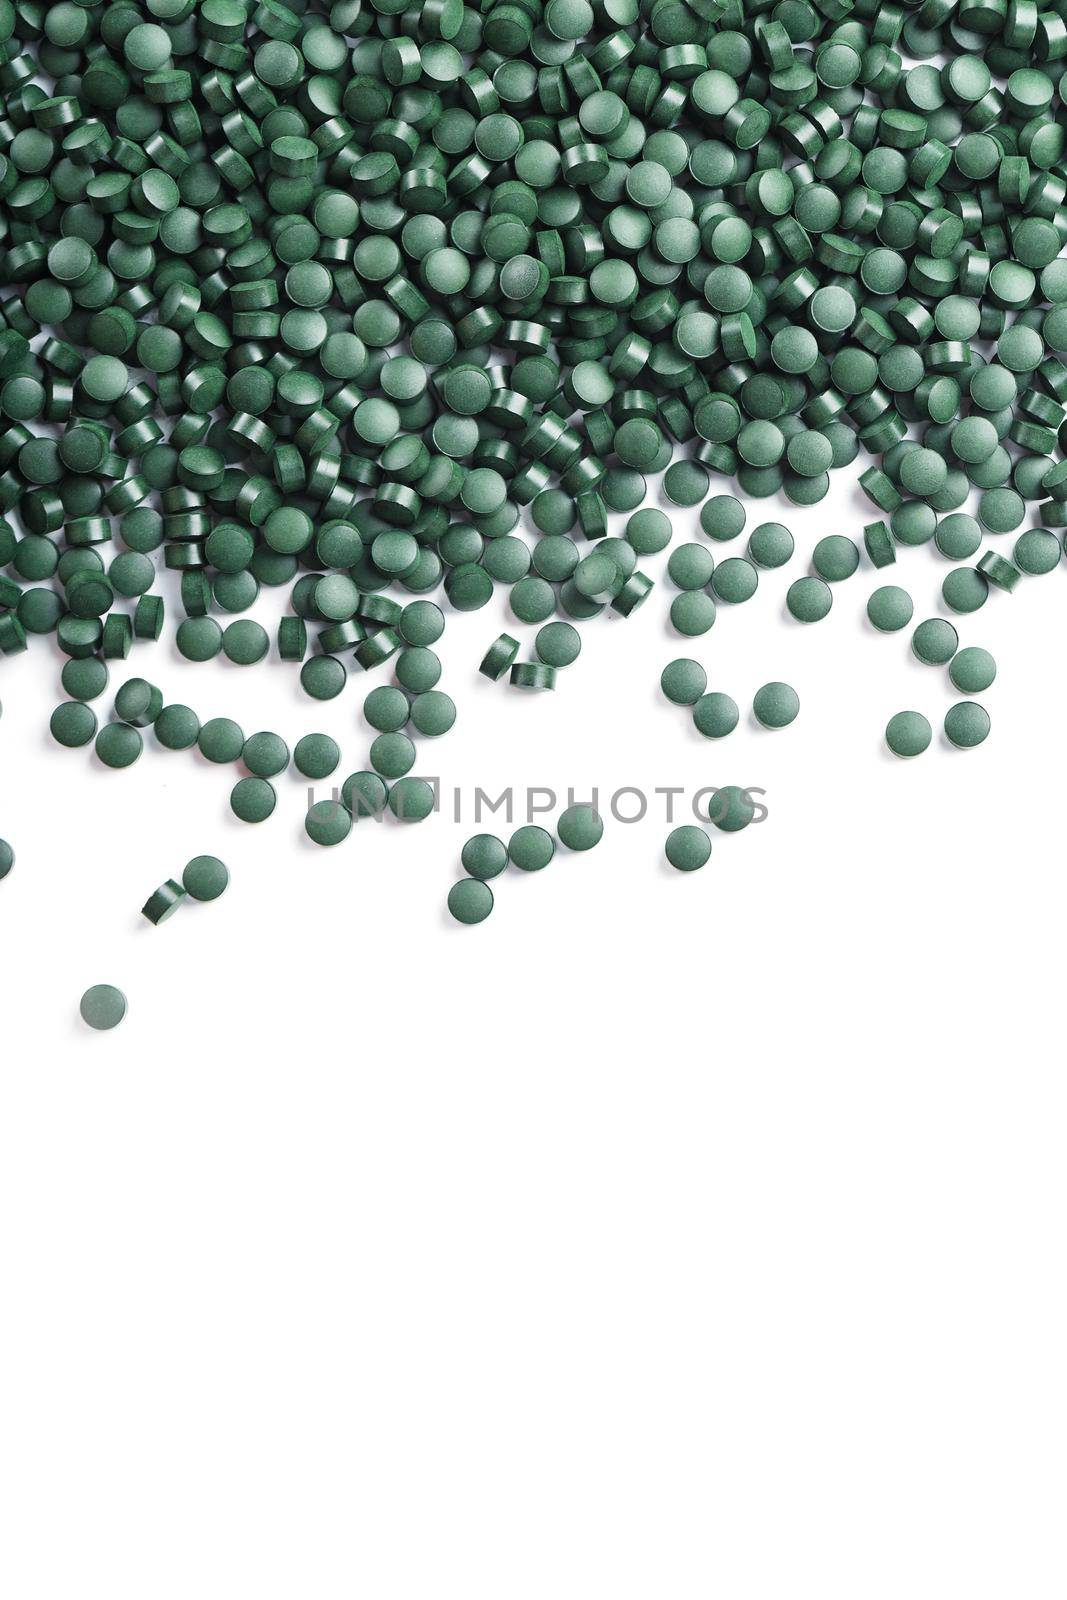 Green tablets made of natural organic spirulina on a white background with free space